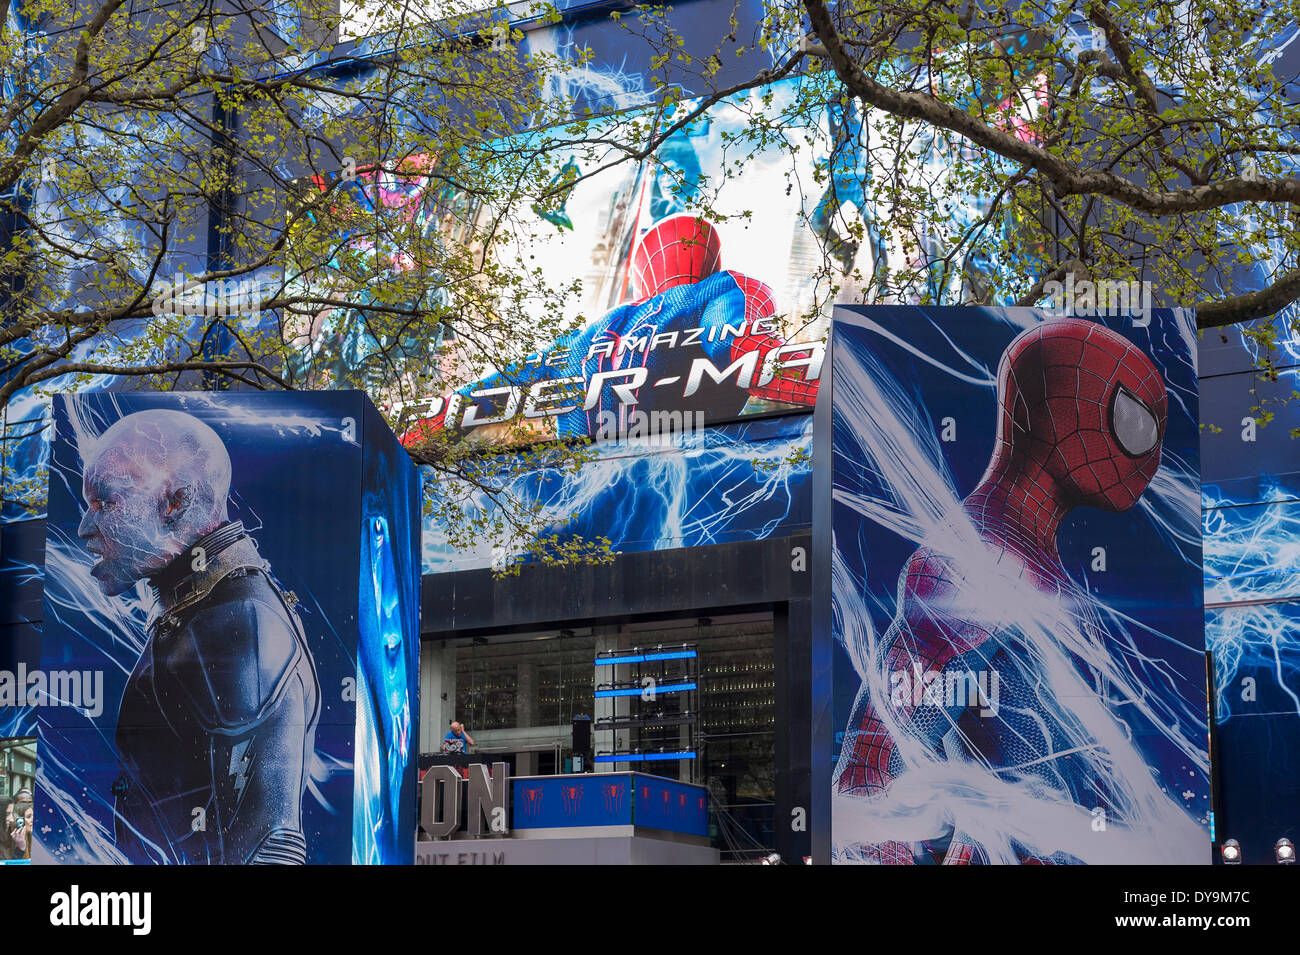 Leicester Square, London, UK, 10 April 2014.  Crowds gather around the advertising hoardings to see the stars of 'The Amazing Spider-Man 2' movie which was having its world premiere. Credit:  Stephen Chung/Alamy Live News Stock Photo